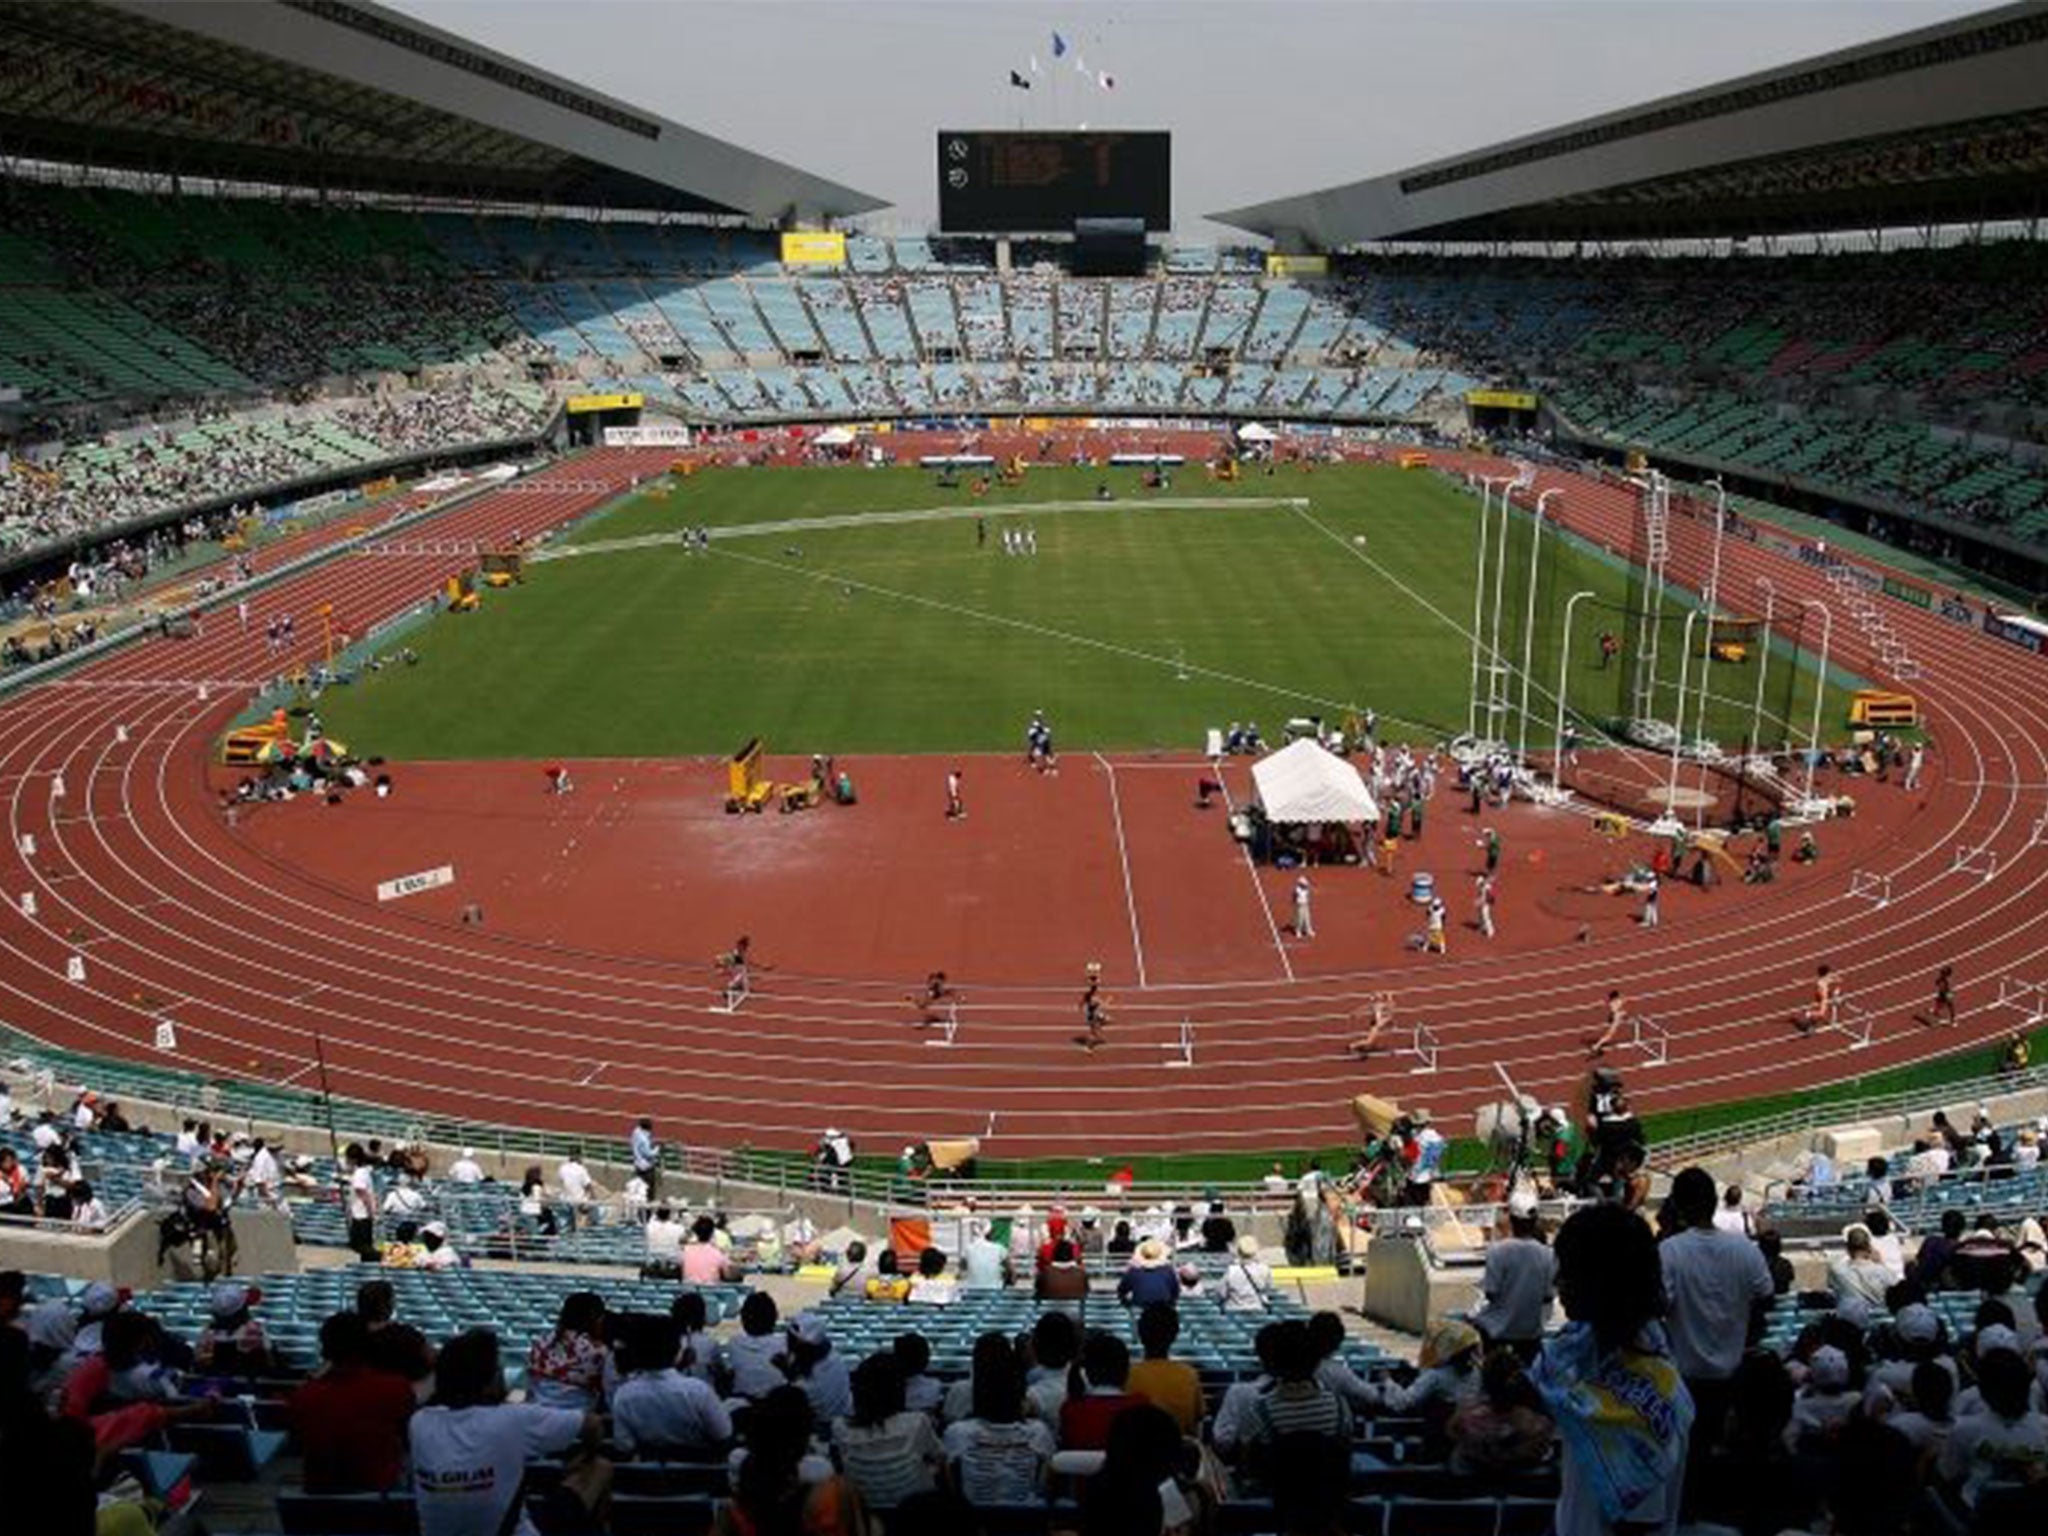 28 athletes have failed 32 doping tests in retests of samples from the 2005 and 2007 world athletics championships